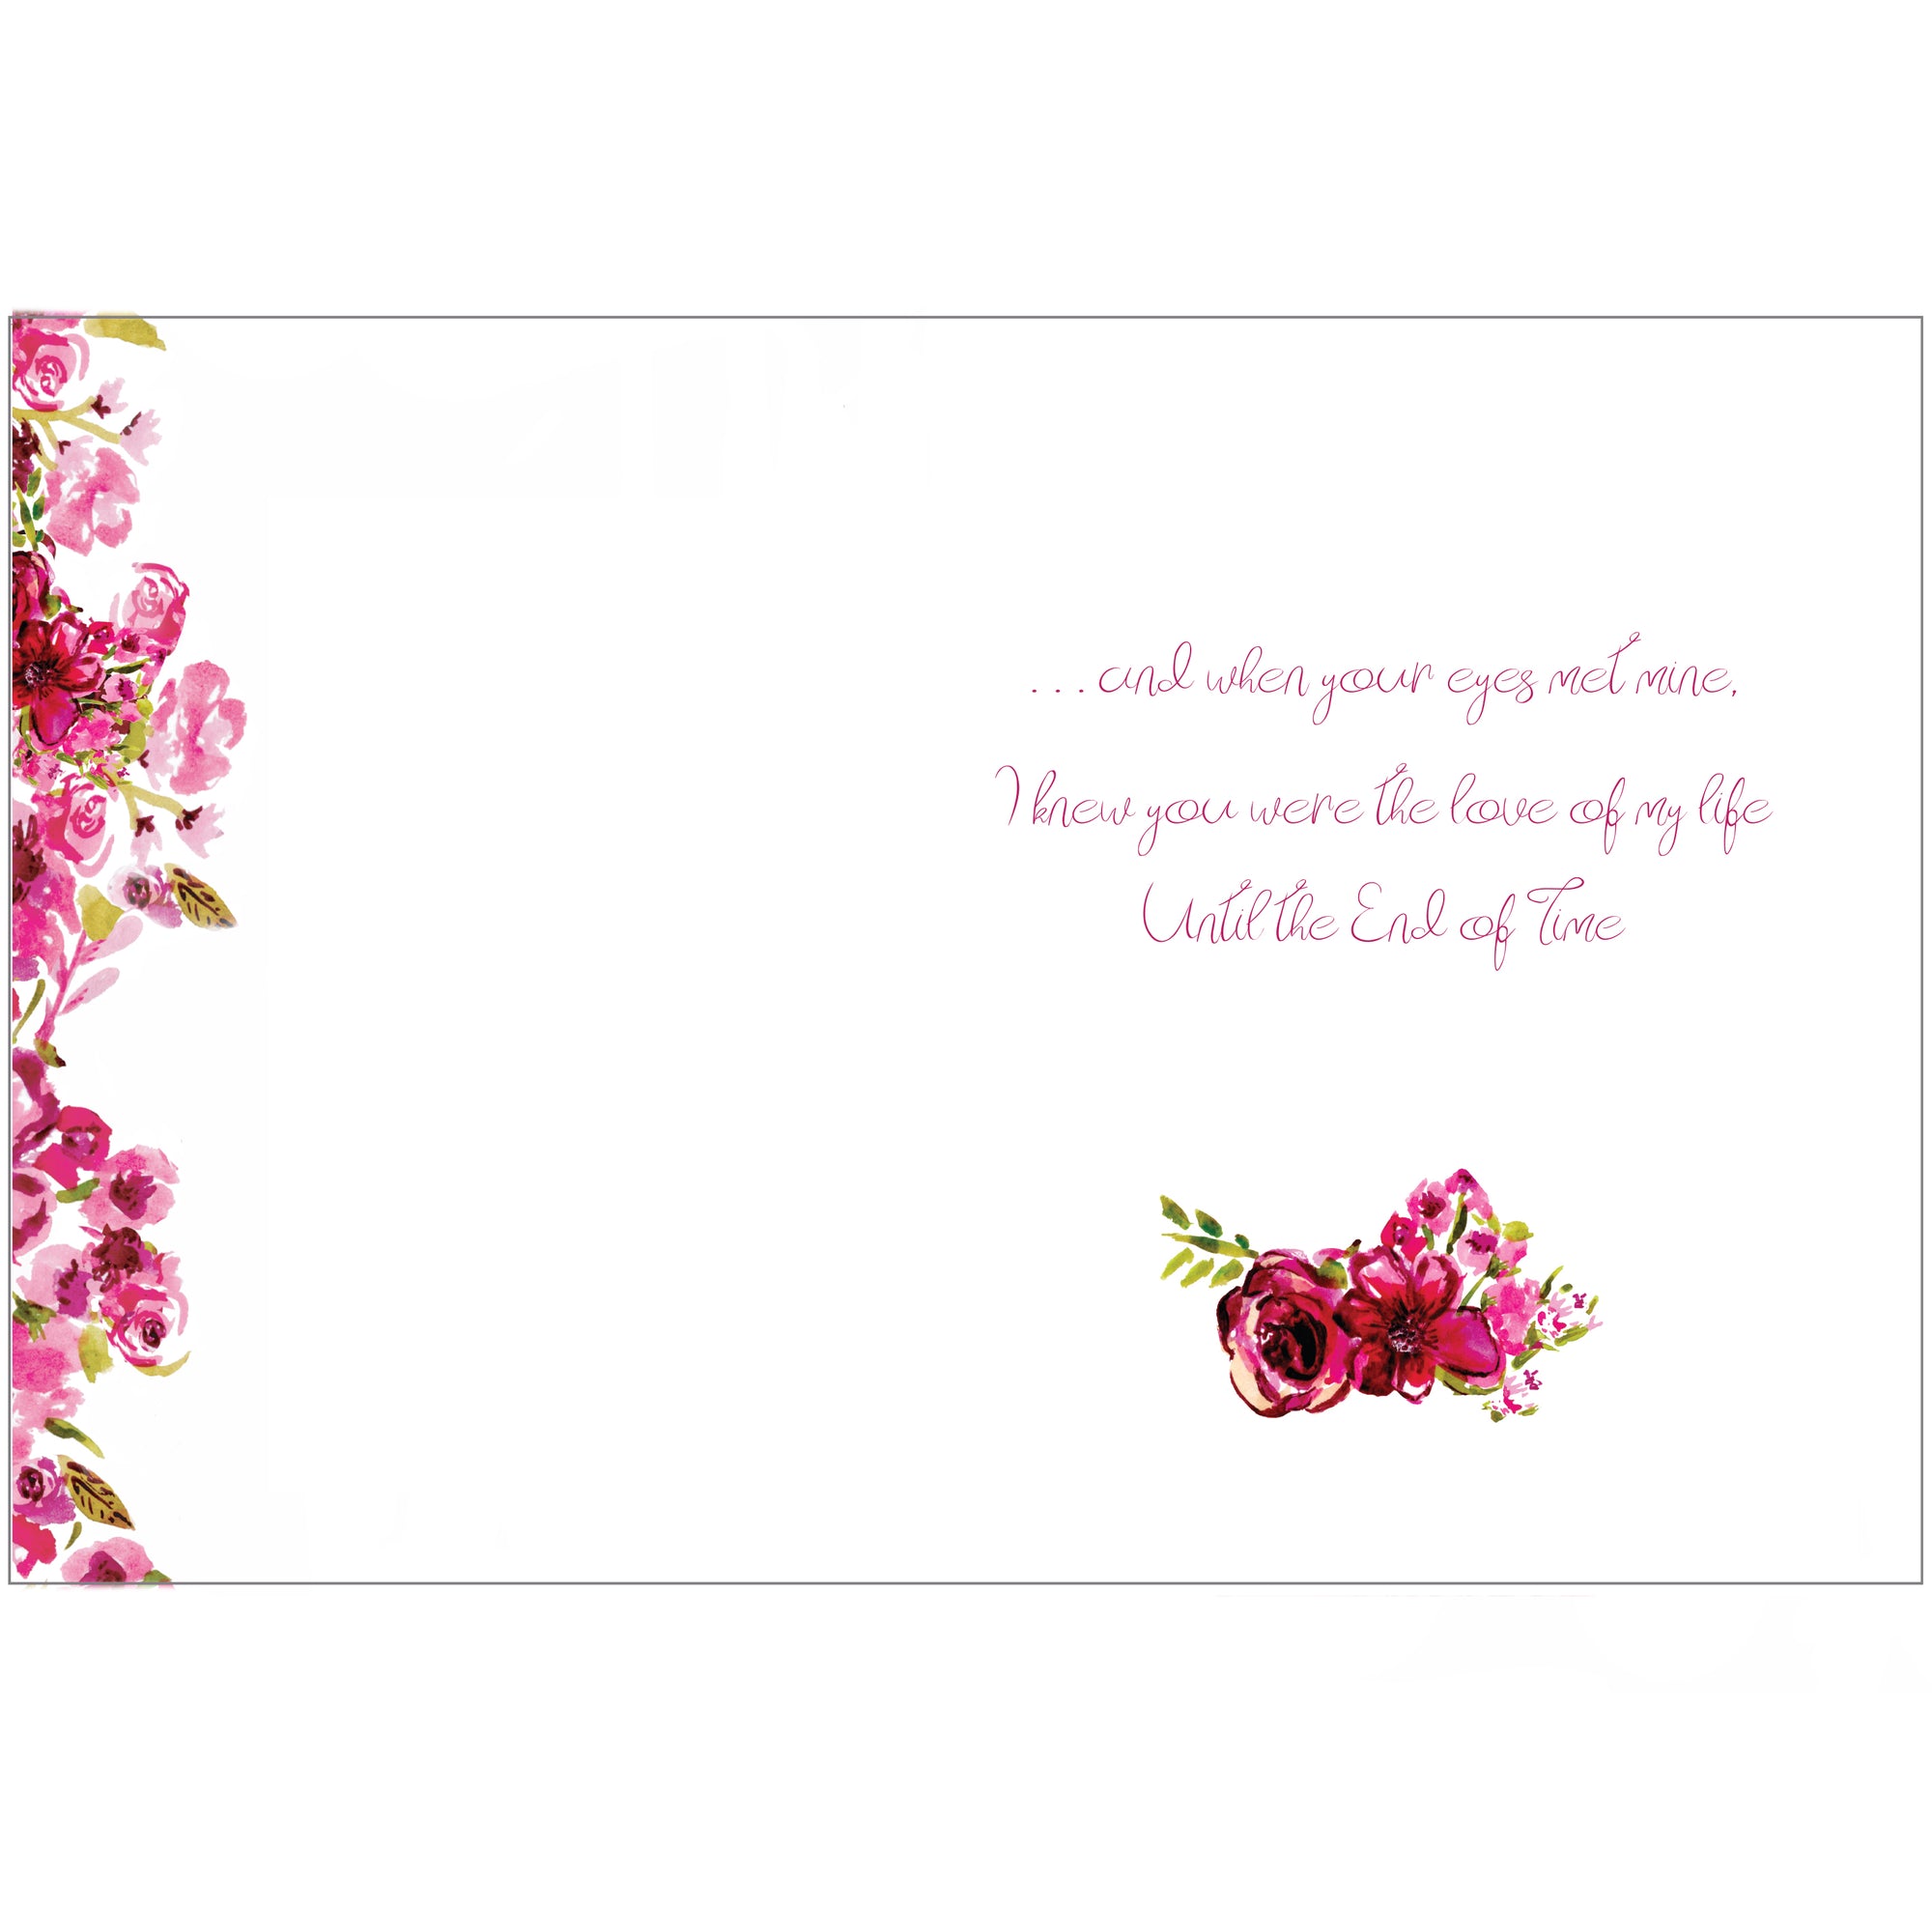 End of Time Love Poem Greeting Card by Renée Rubach Love and Valentine's Day